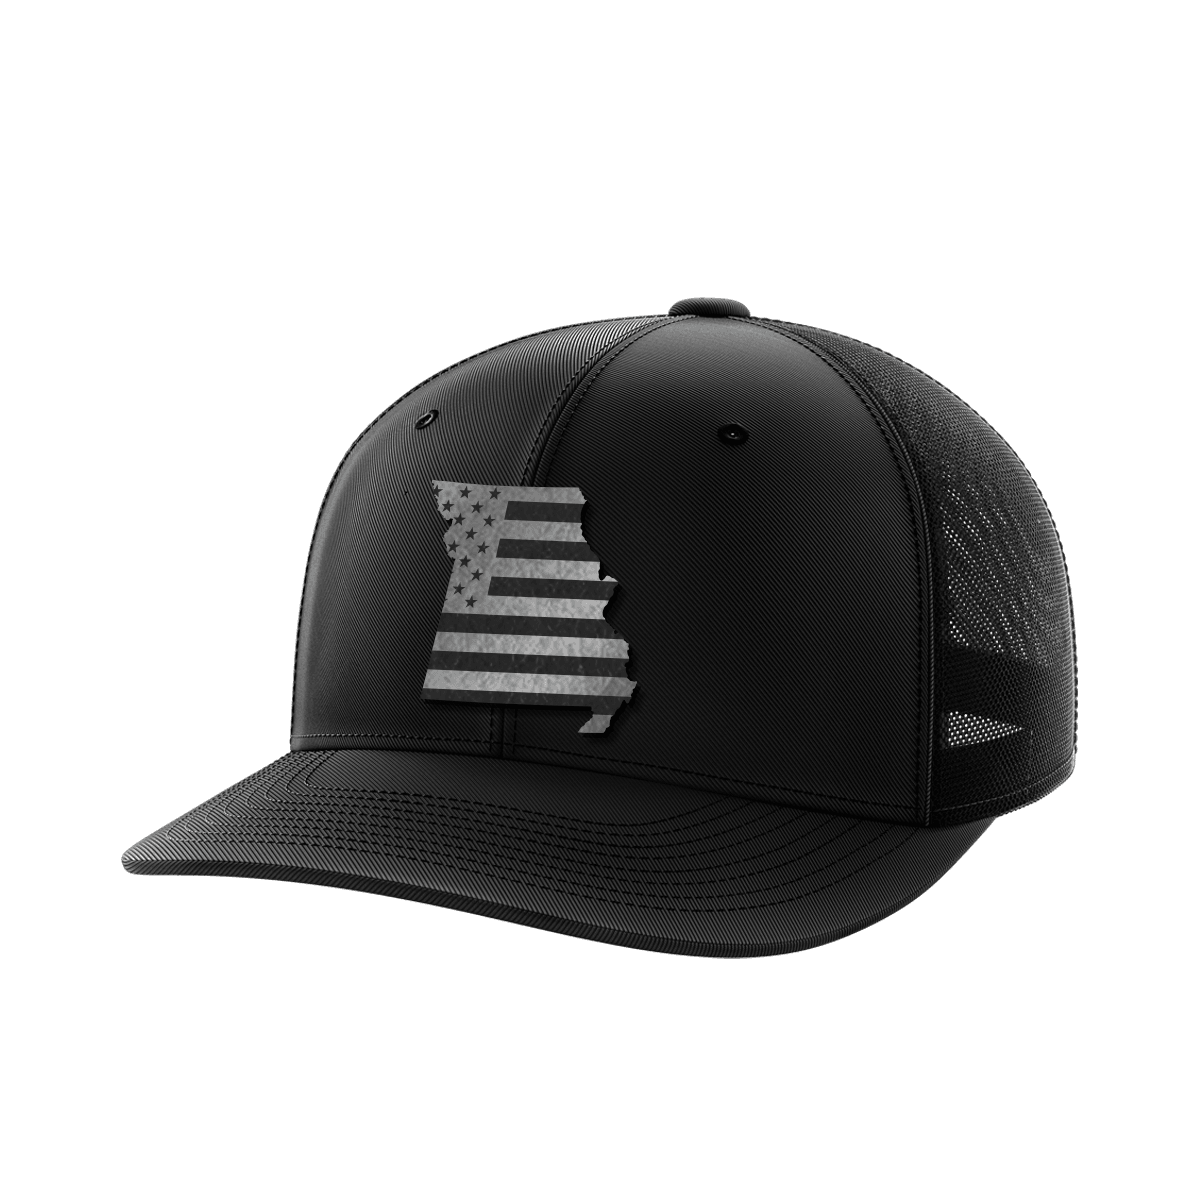 Missouri United Collection (black leather) - Greater Half